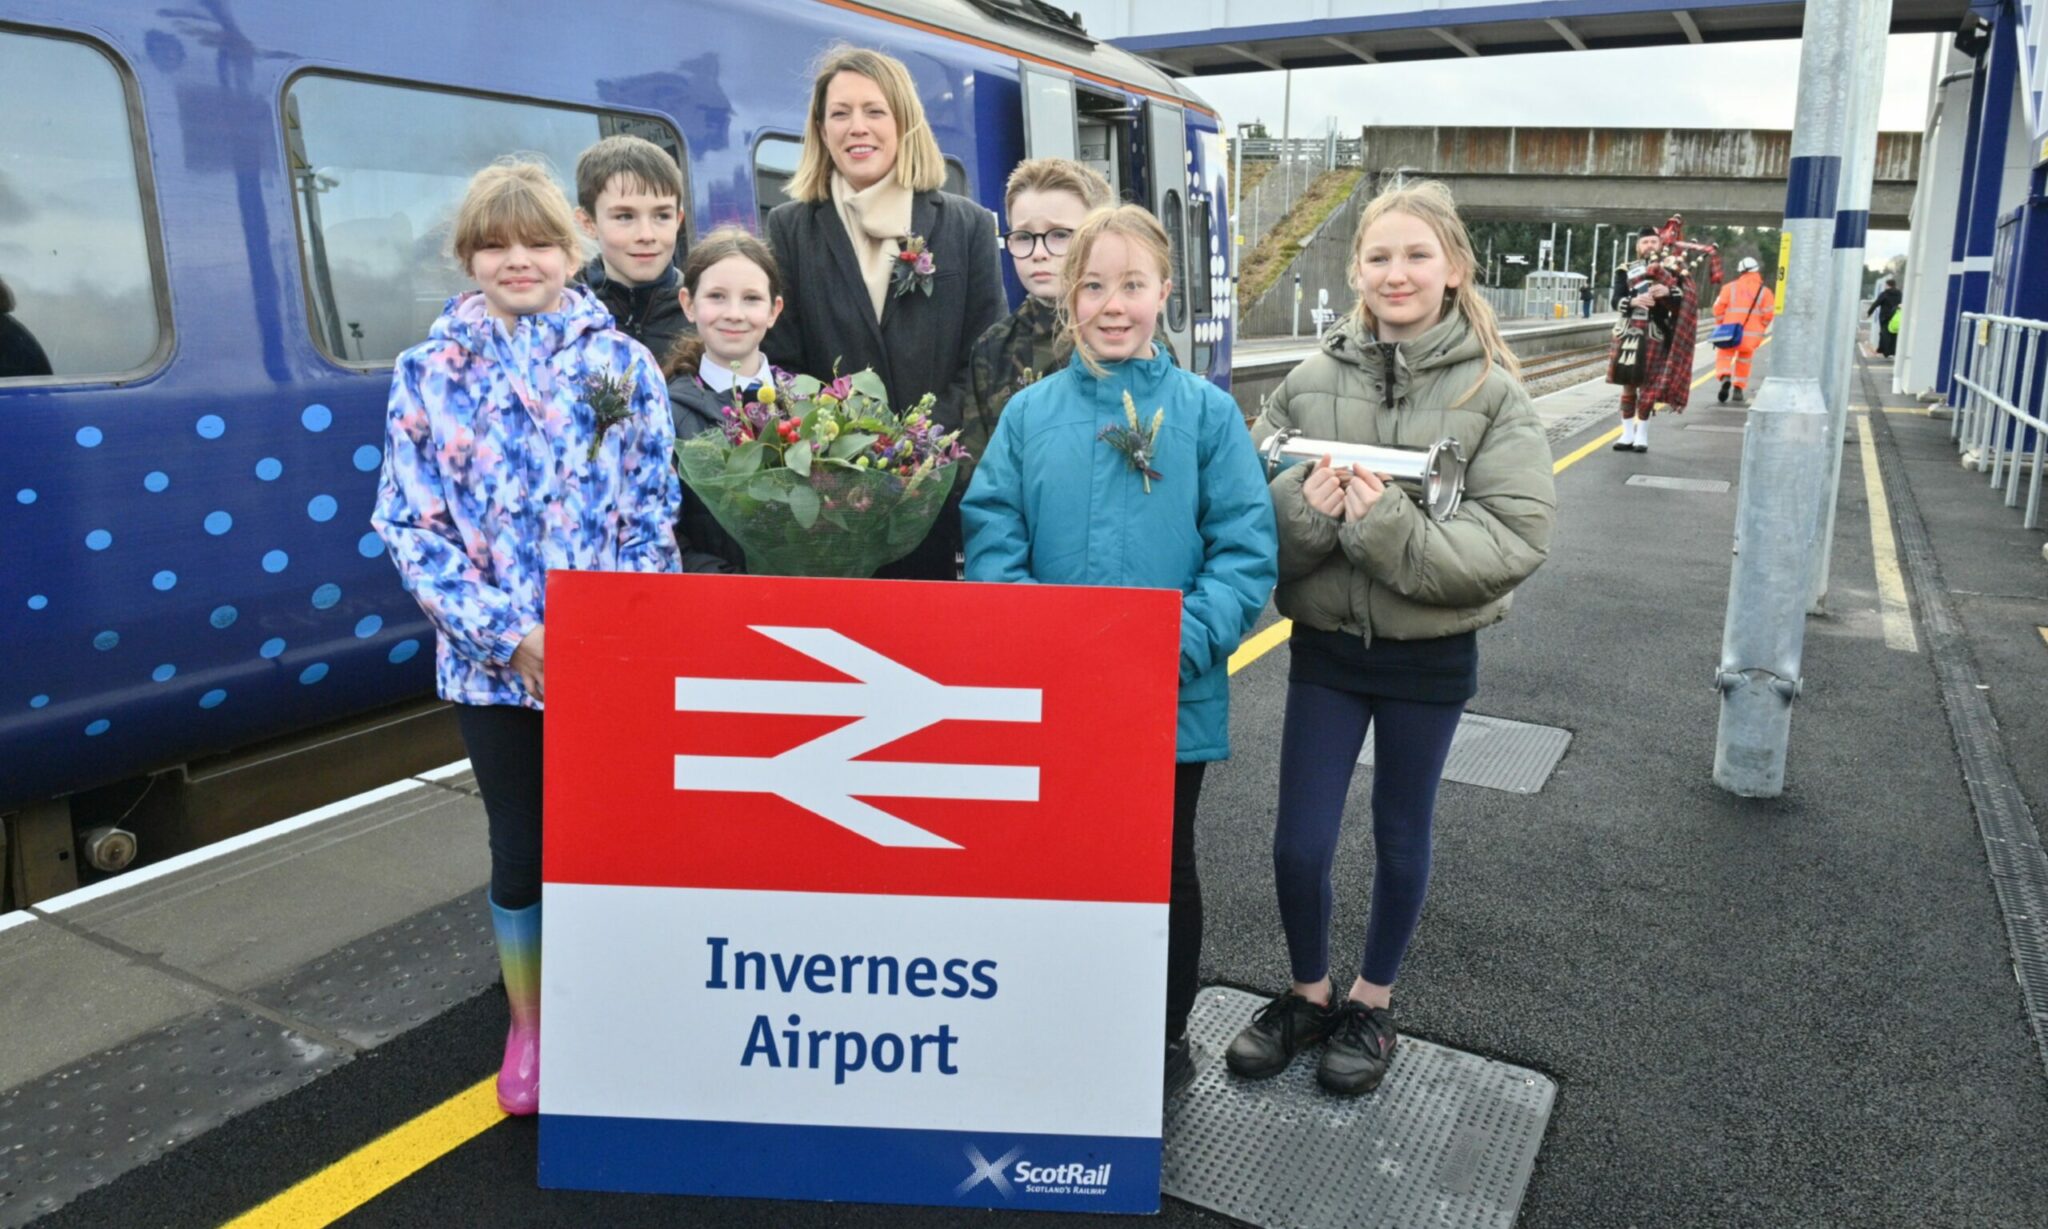 Inverness Airport Railway Station finally opens